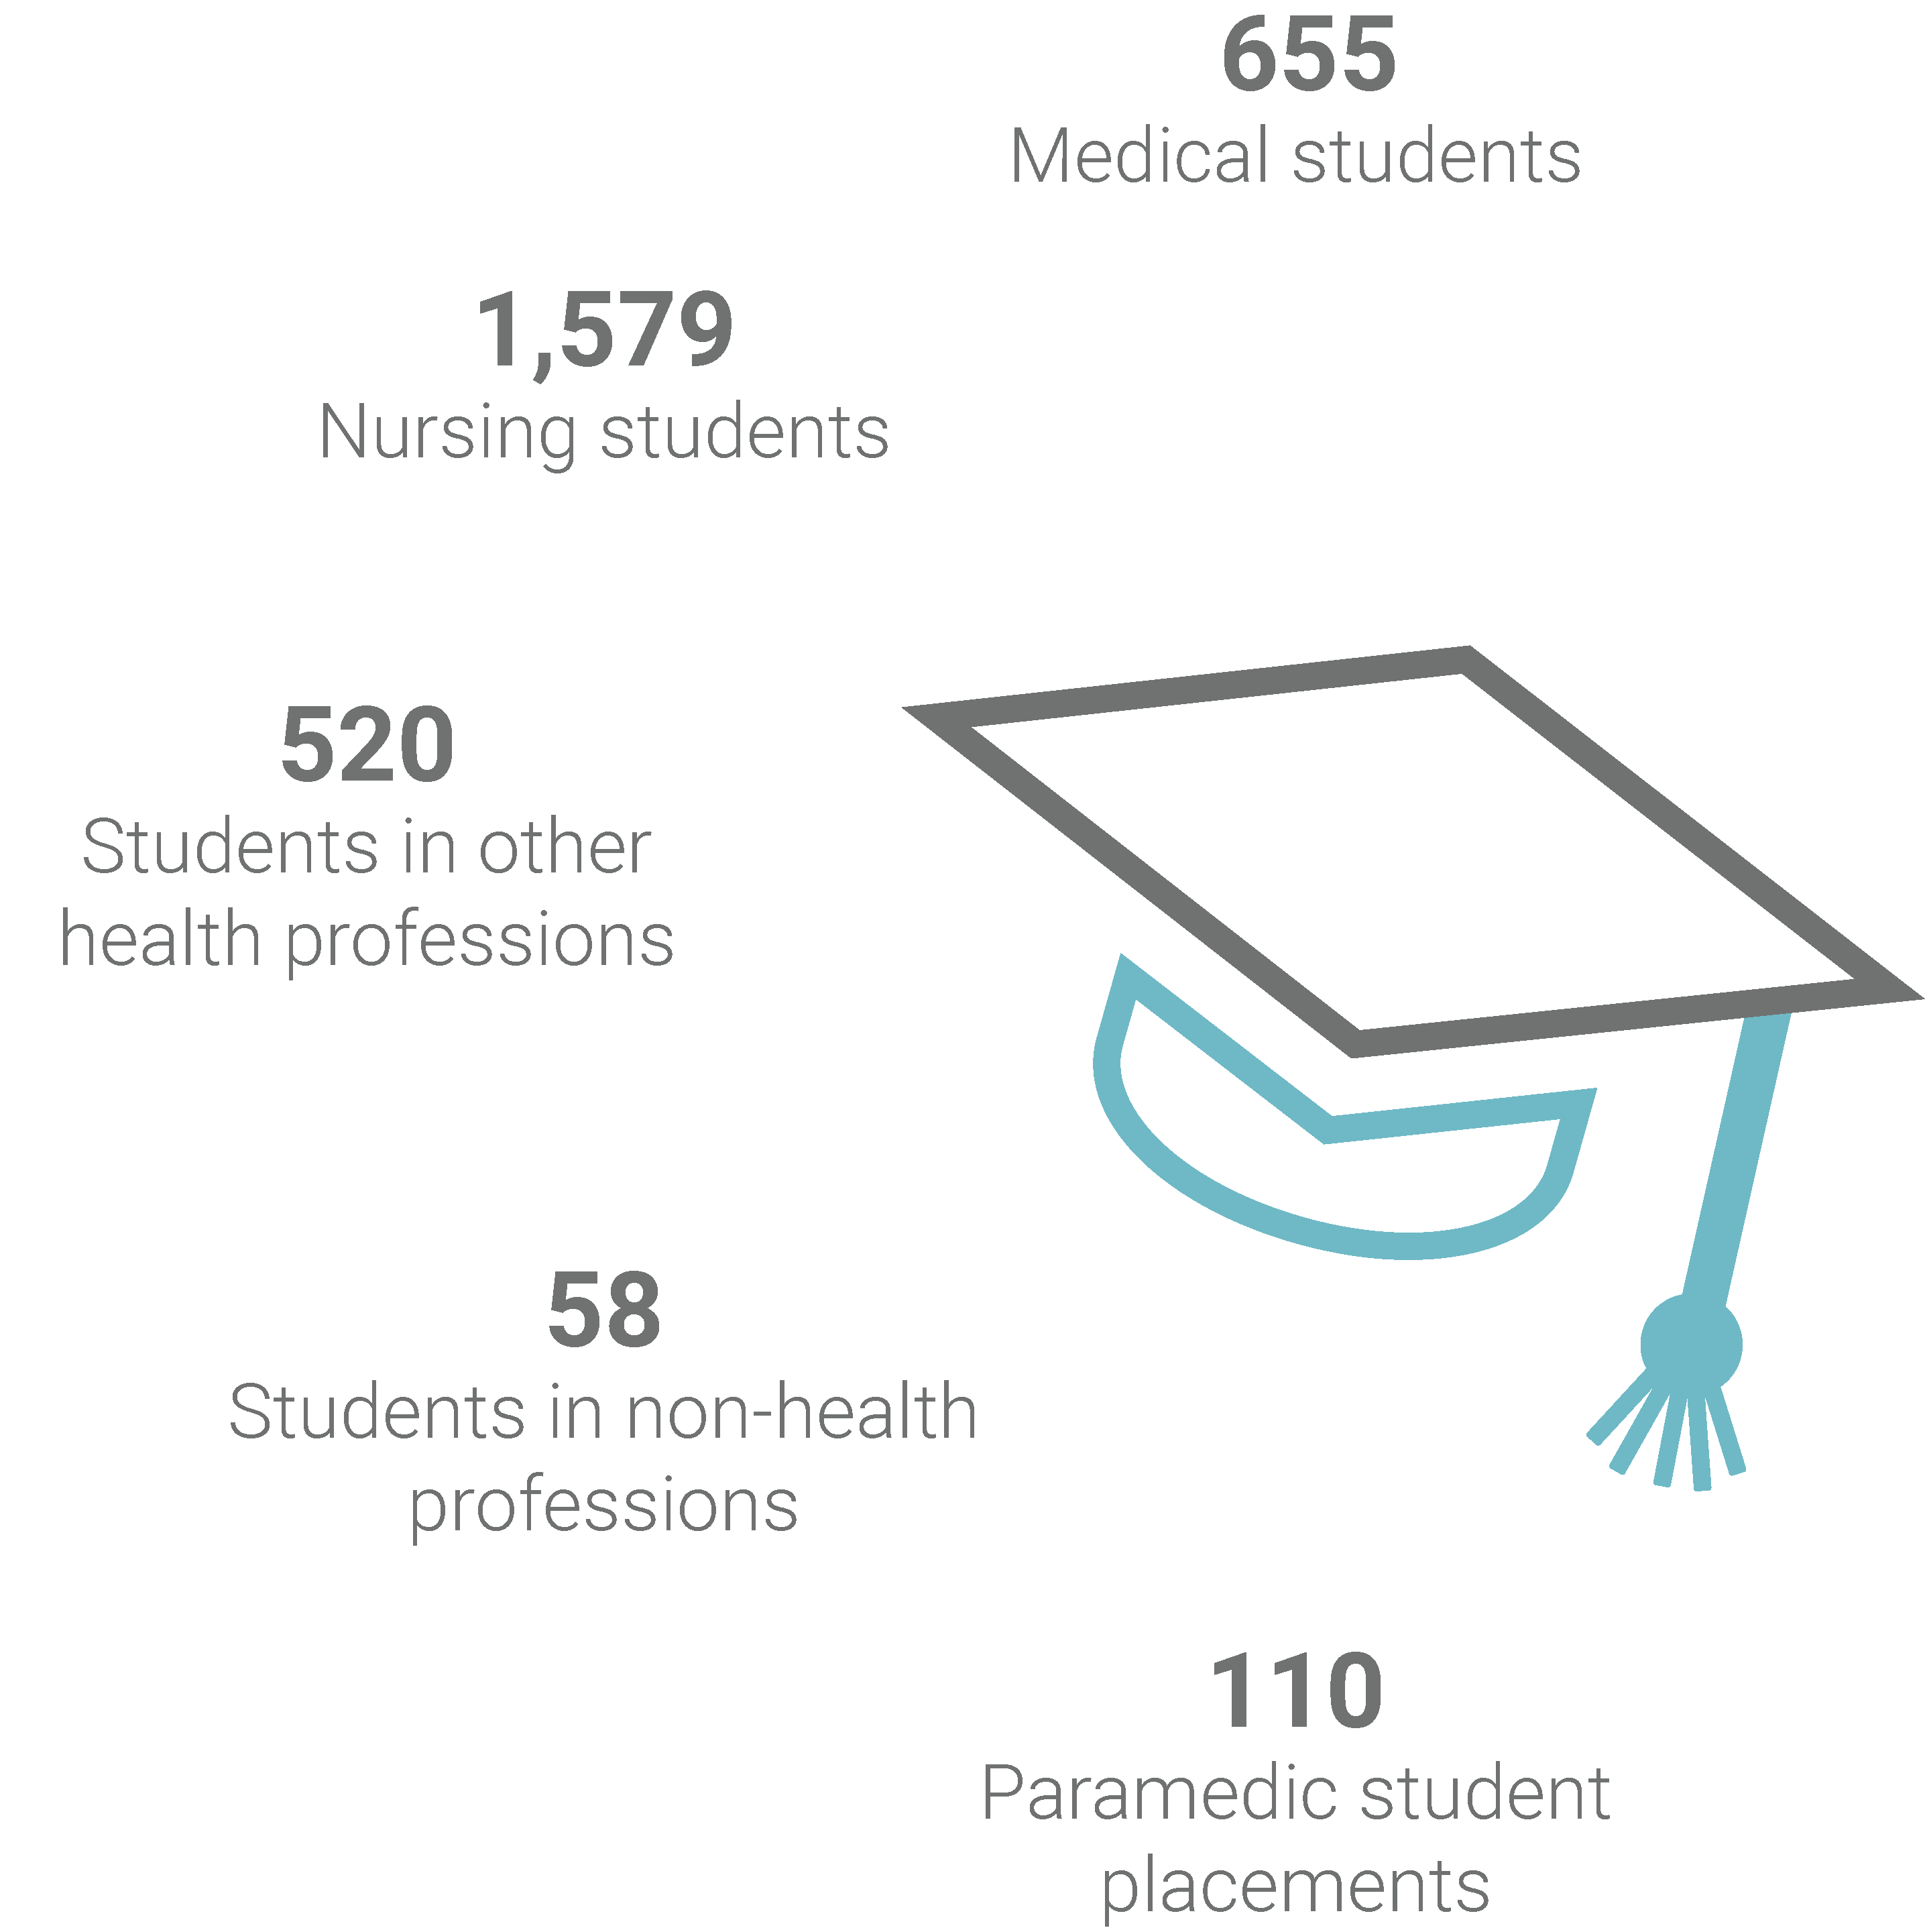 Learners's data-665 Medical students, 1579 Nursing students, 520 Students in other health professions, 58 Students in non-health professions, 110 Paramedic student